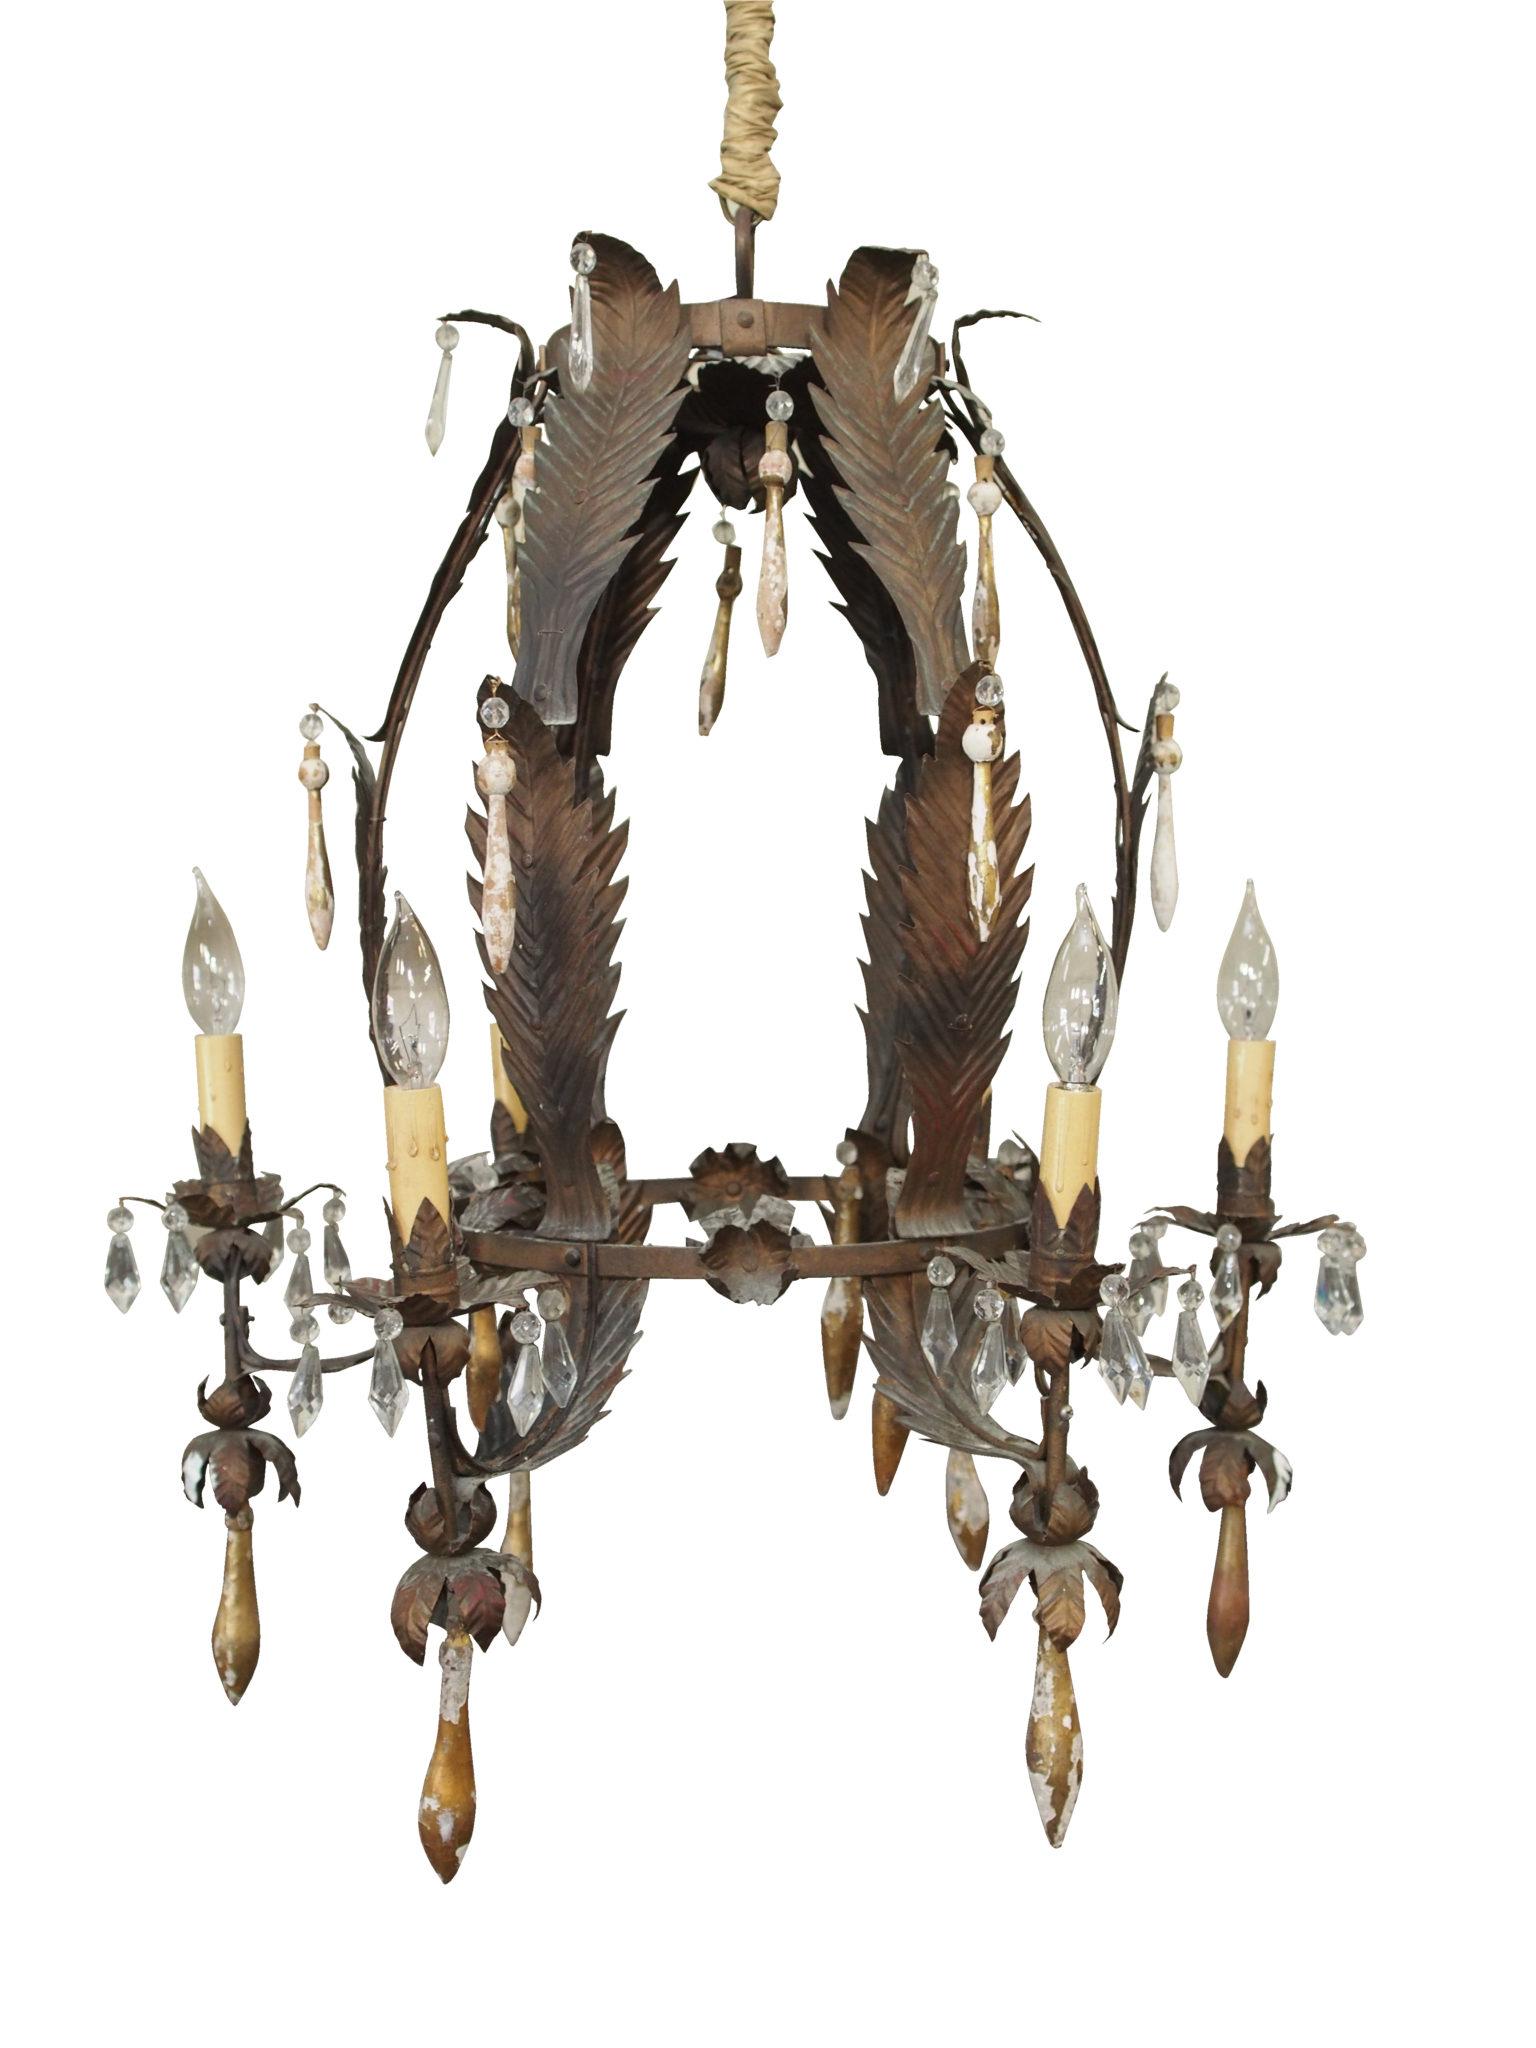 Italian tole leaf chandelier with gilded tassels and crystals.

Purchased in the South of France, this unique 6-arm chandelier is a leaf form in metal with detail in elements that surround each bobeche and arm.